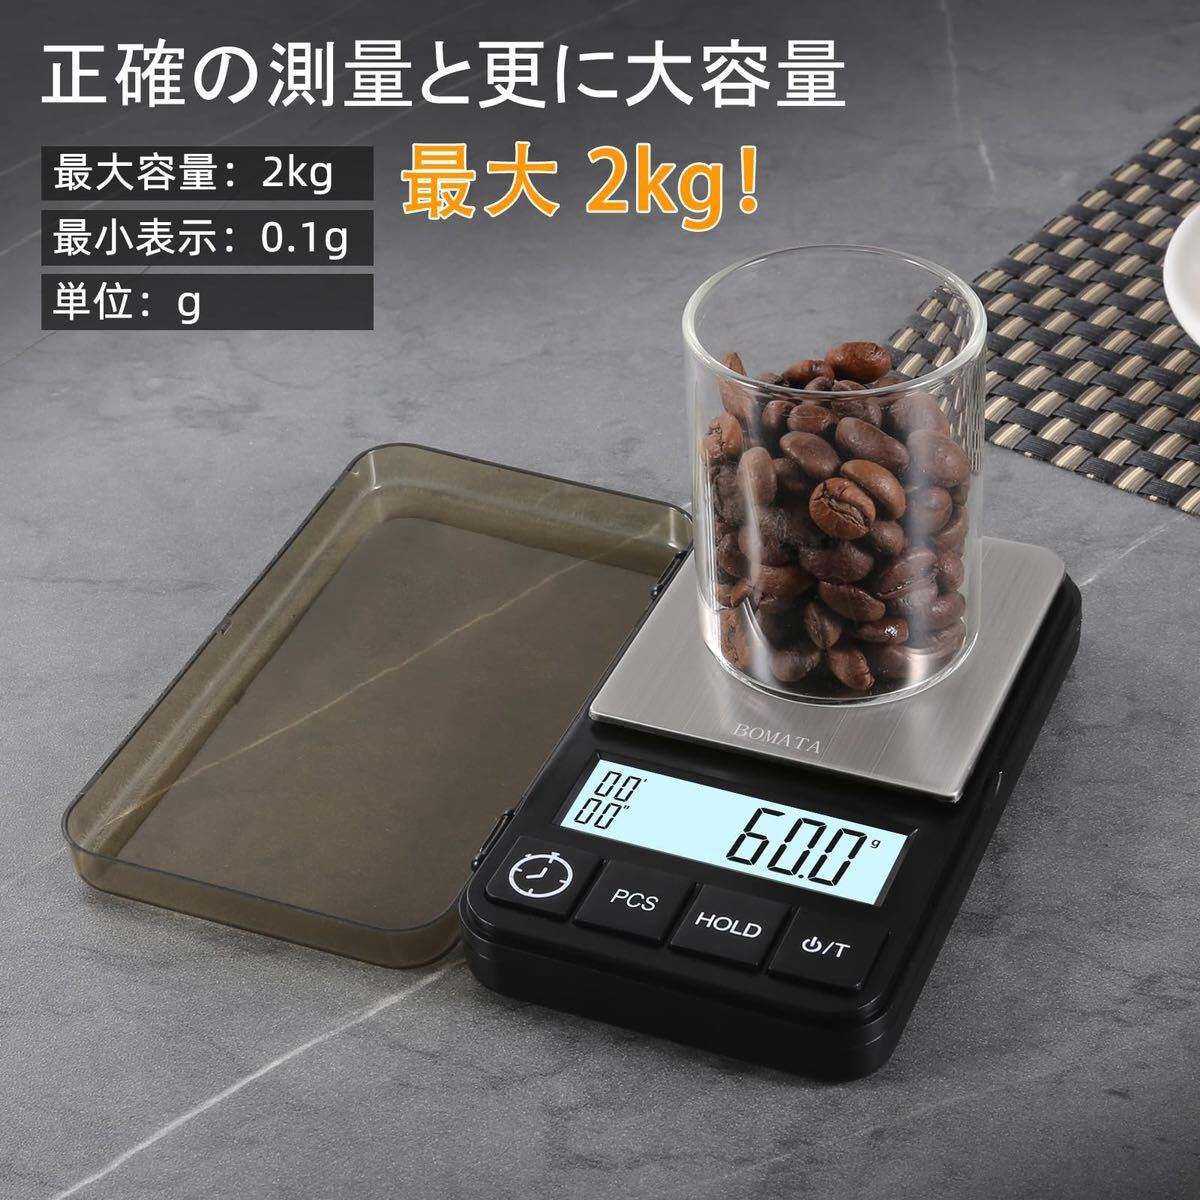 * pocket digital scale 2kg 0.1g unit small size coffee scale timer attaching portable scale 